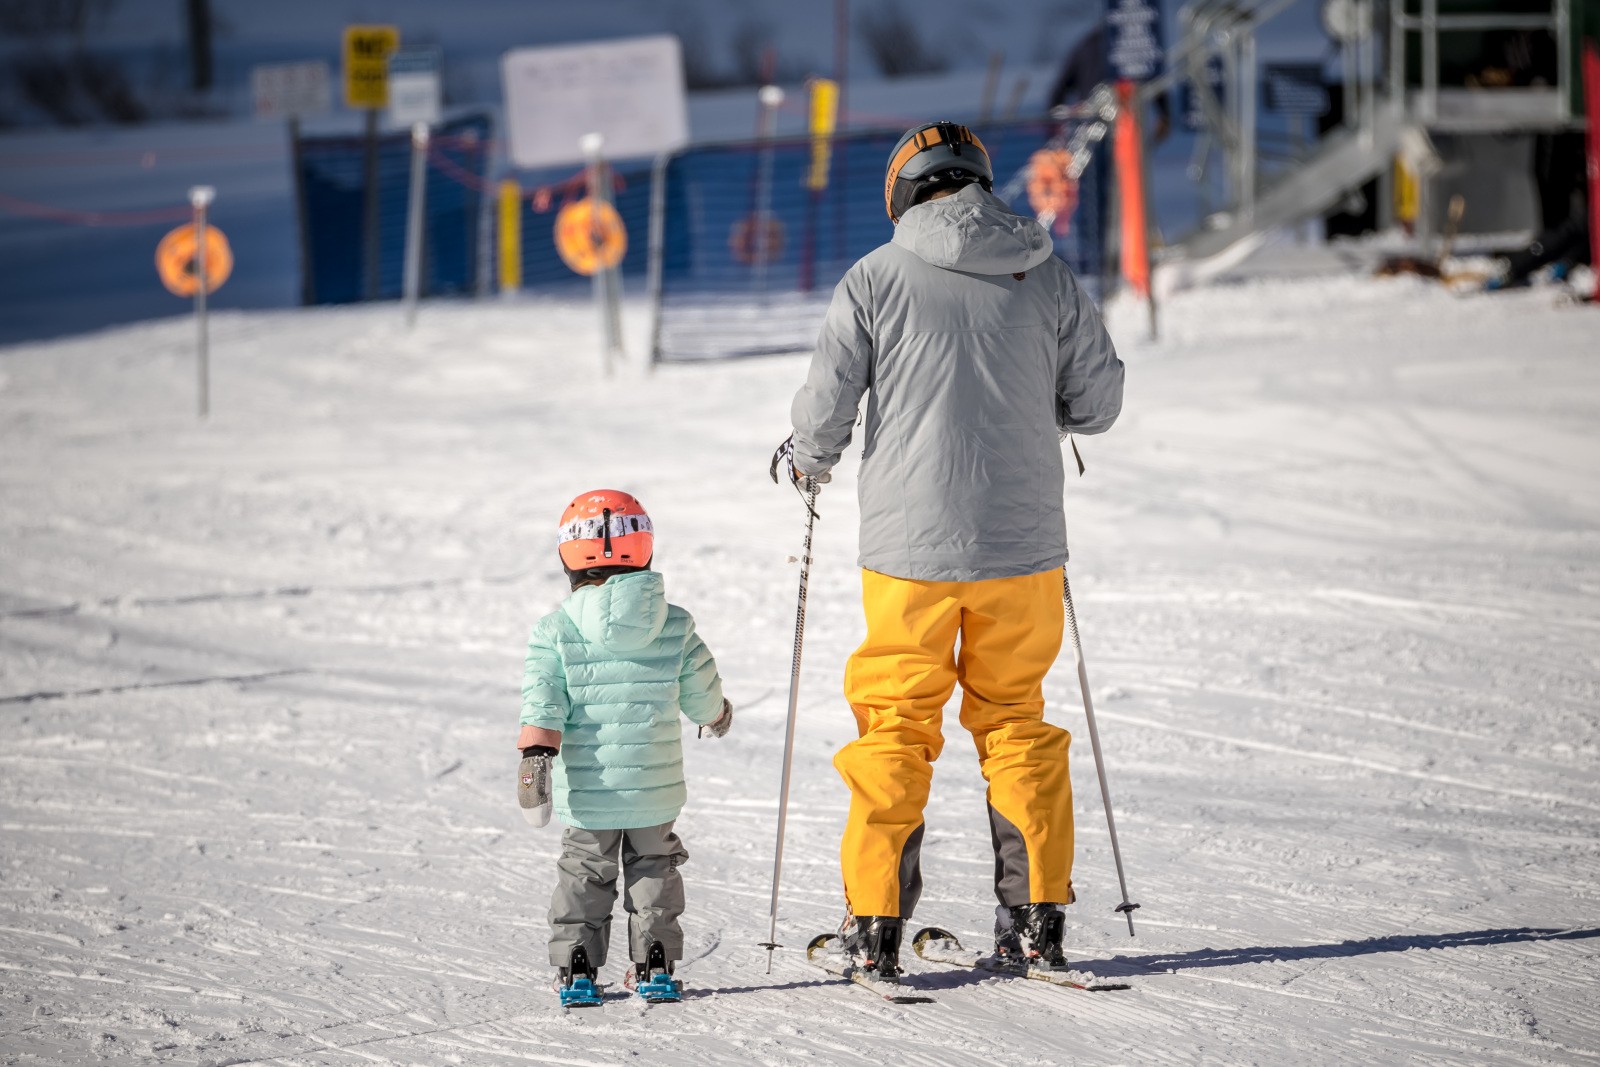 Taking Your Kids Skiing for the First Time